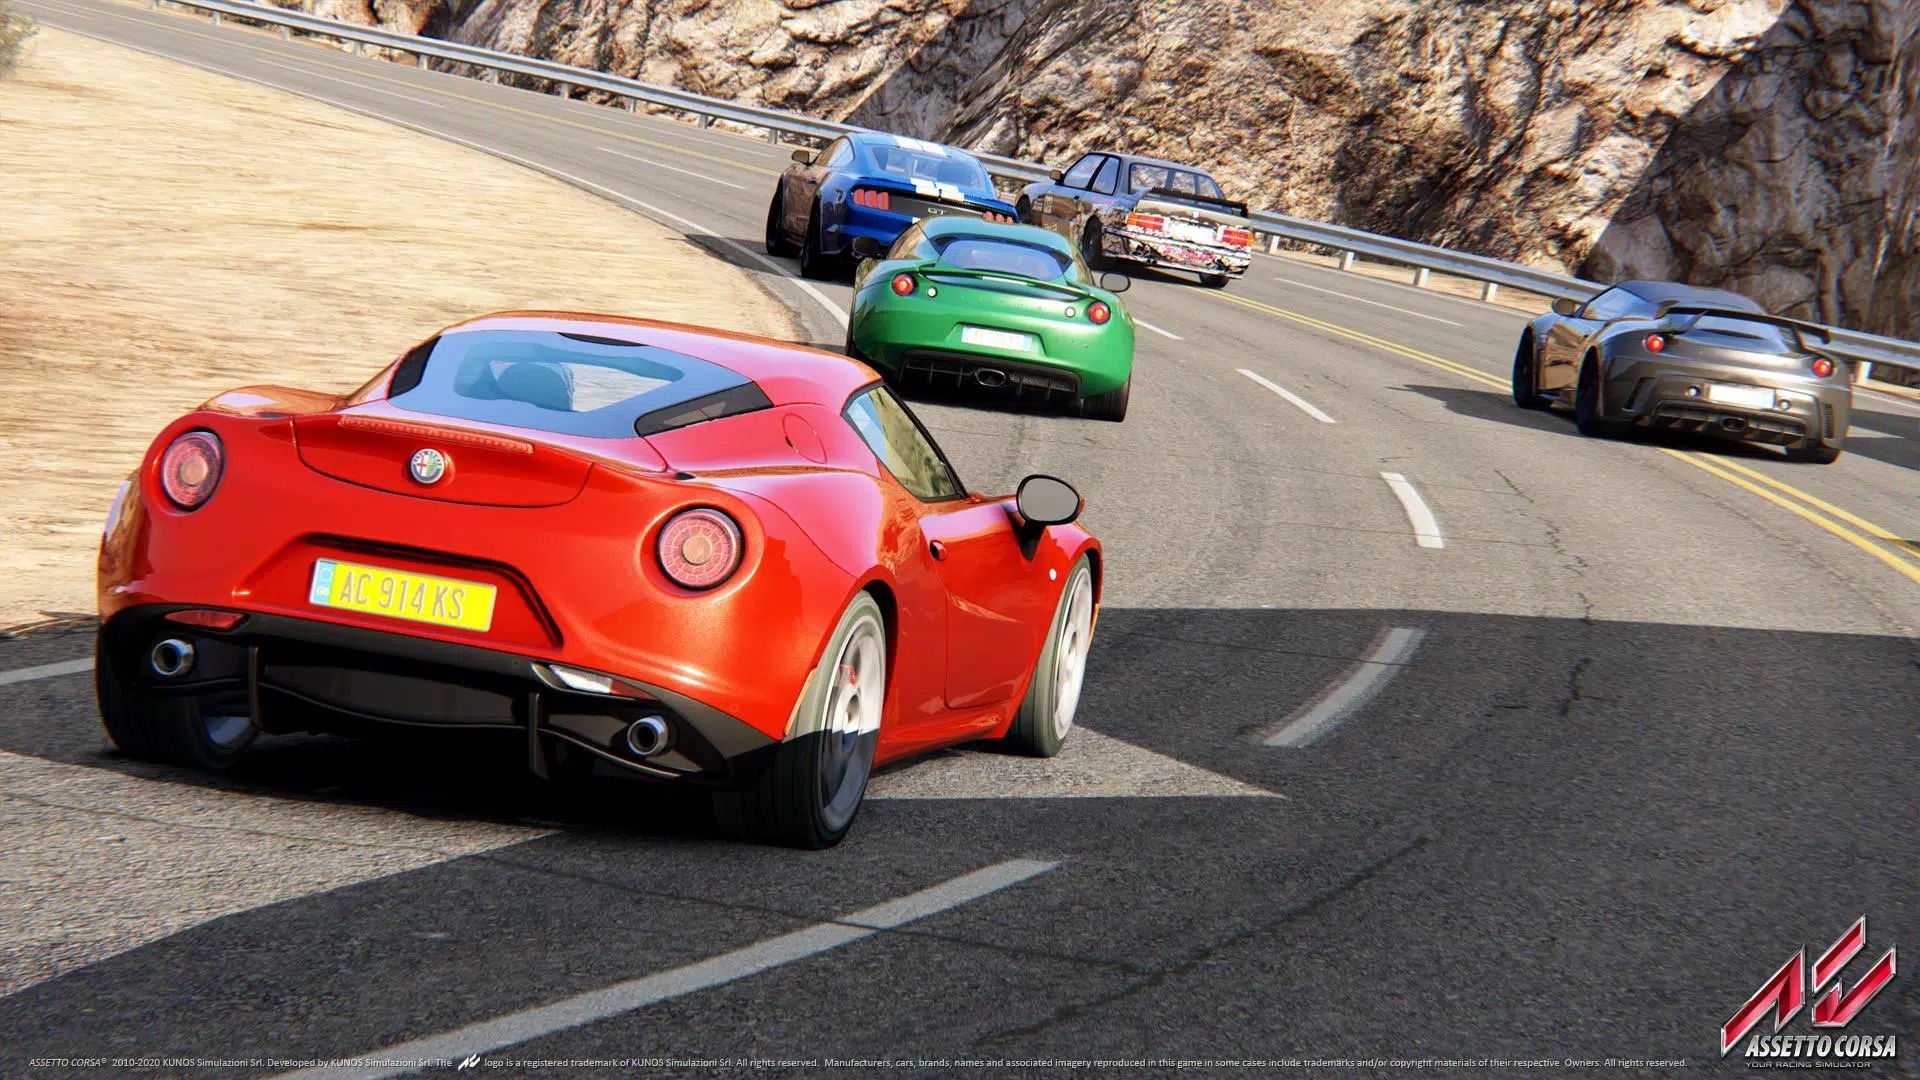 Download Assetto Corsa Apk v1.0 For Android